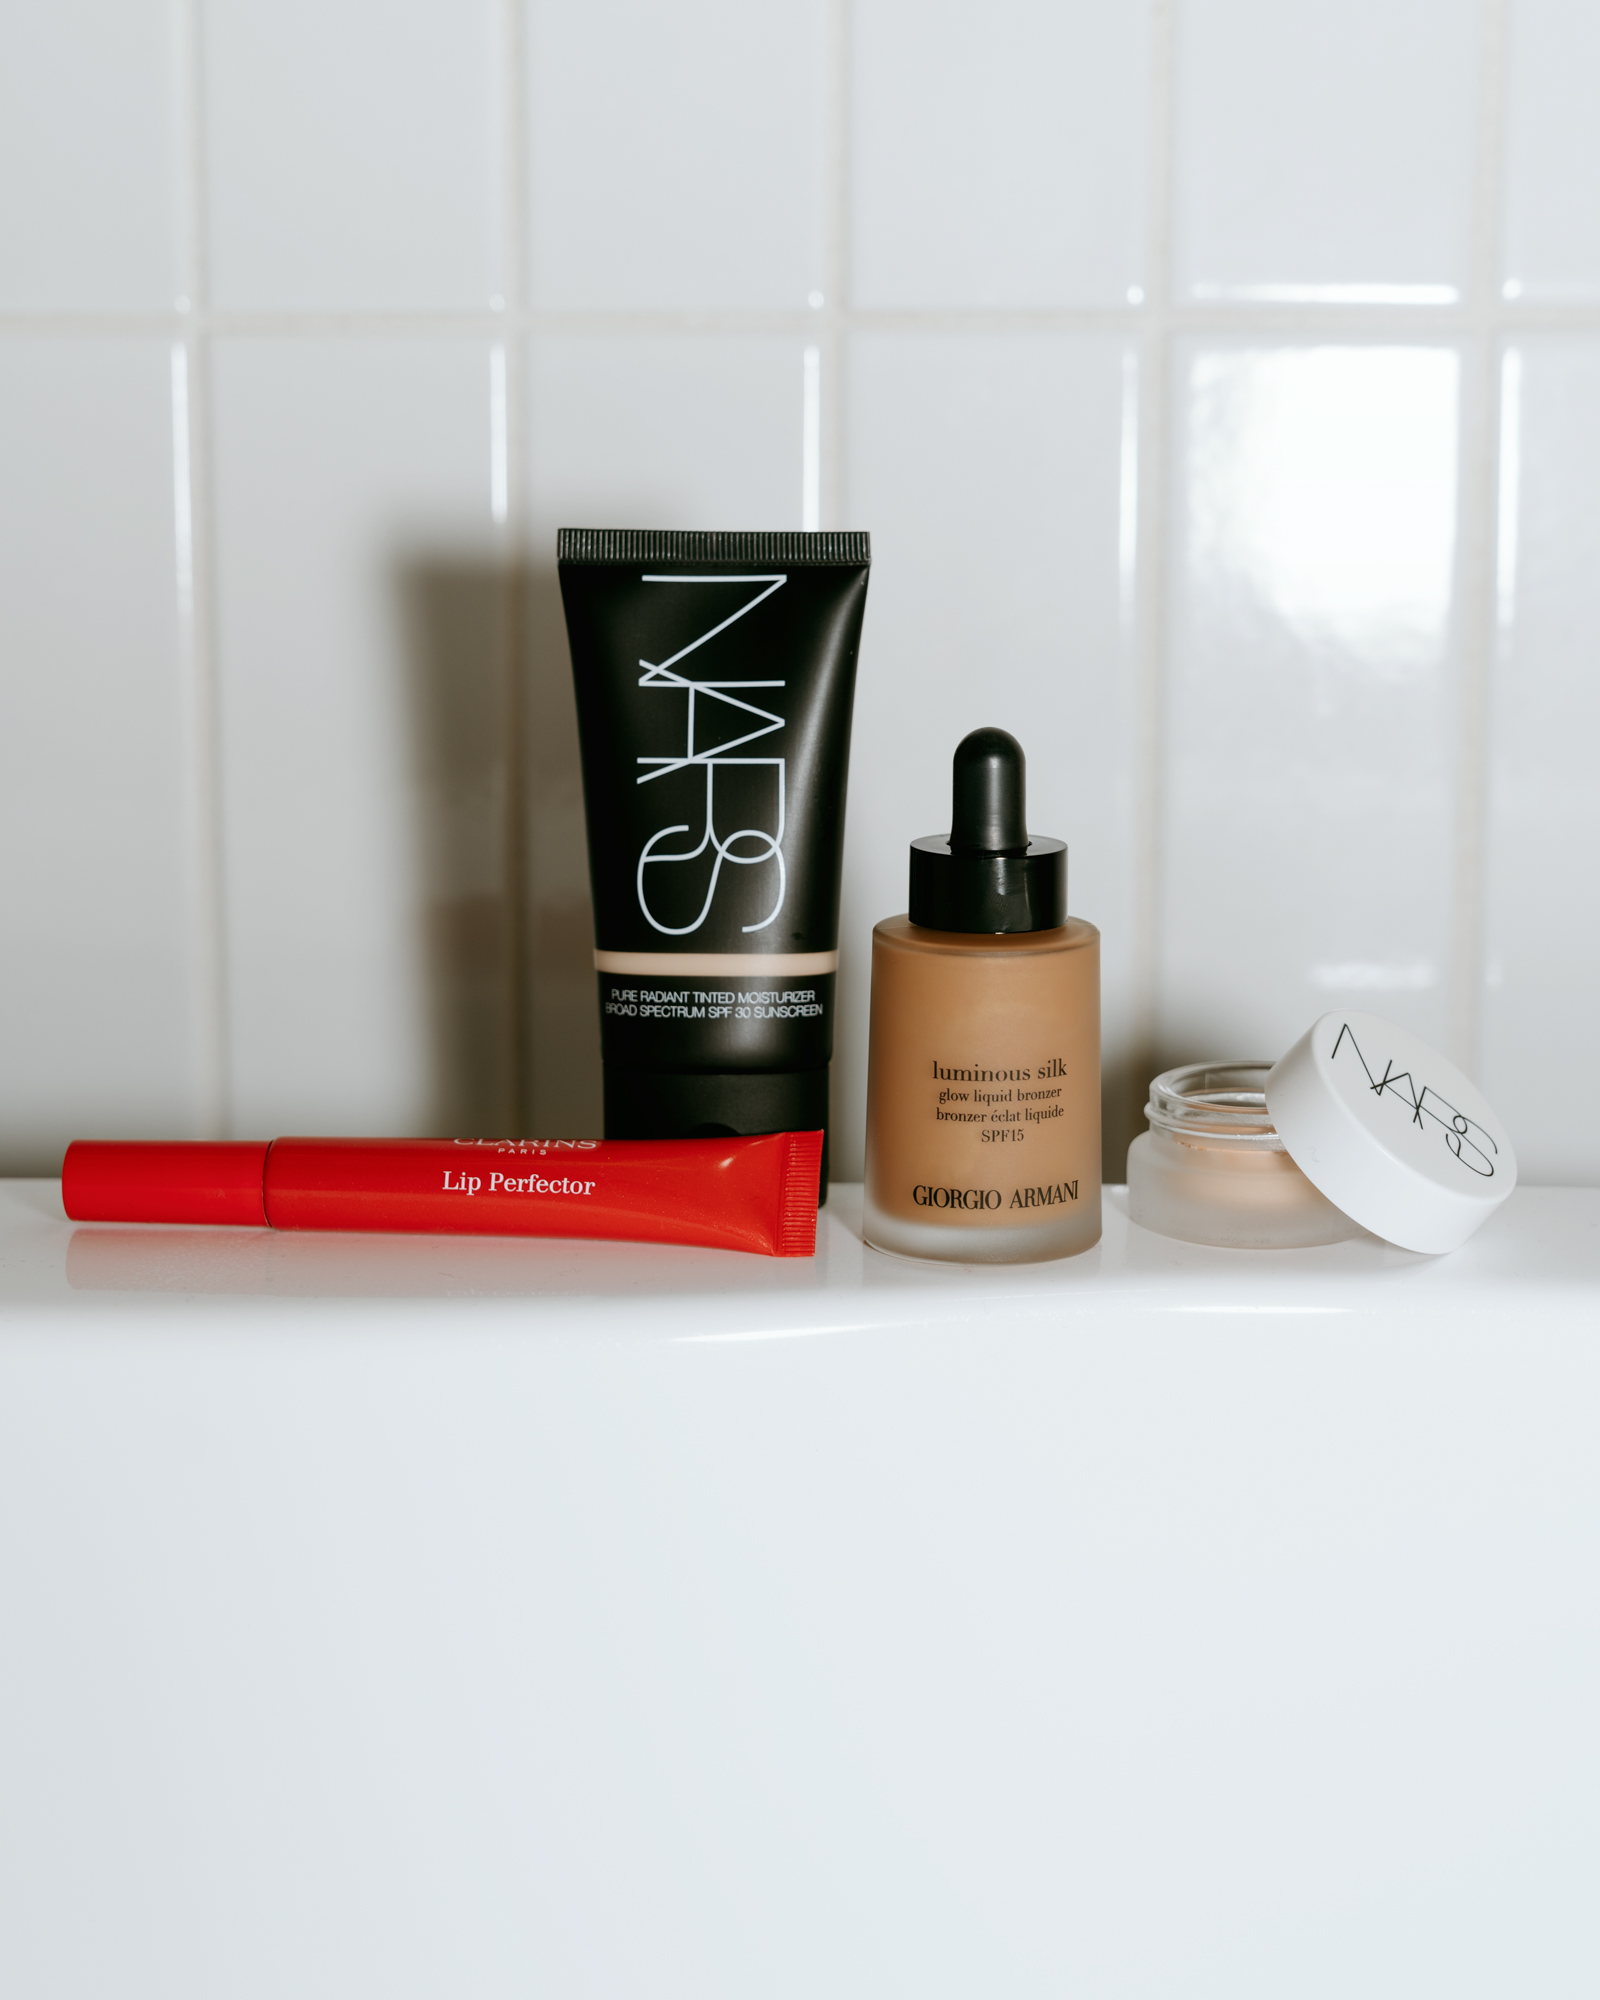 Nars , Clarins, and Giorgio Armani makeup products from Easy Summer Beauty With Nordstrom